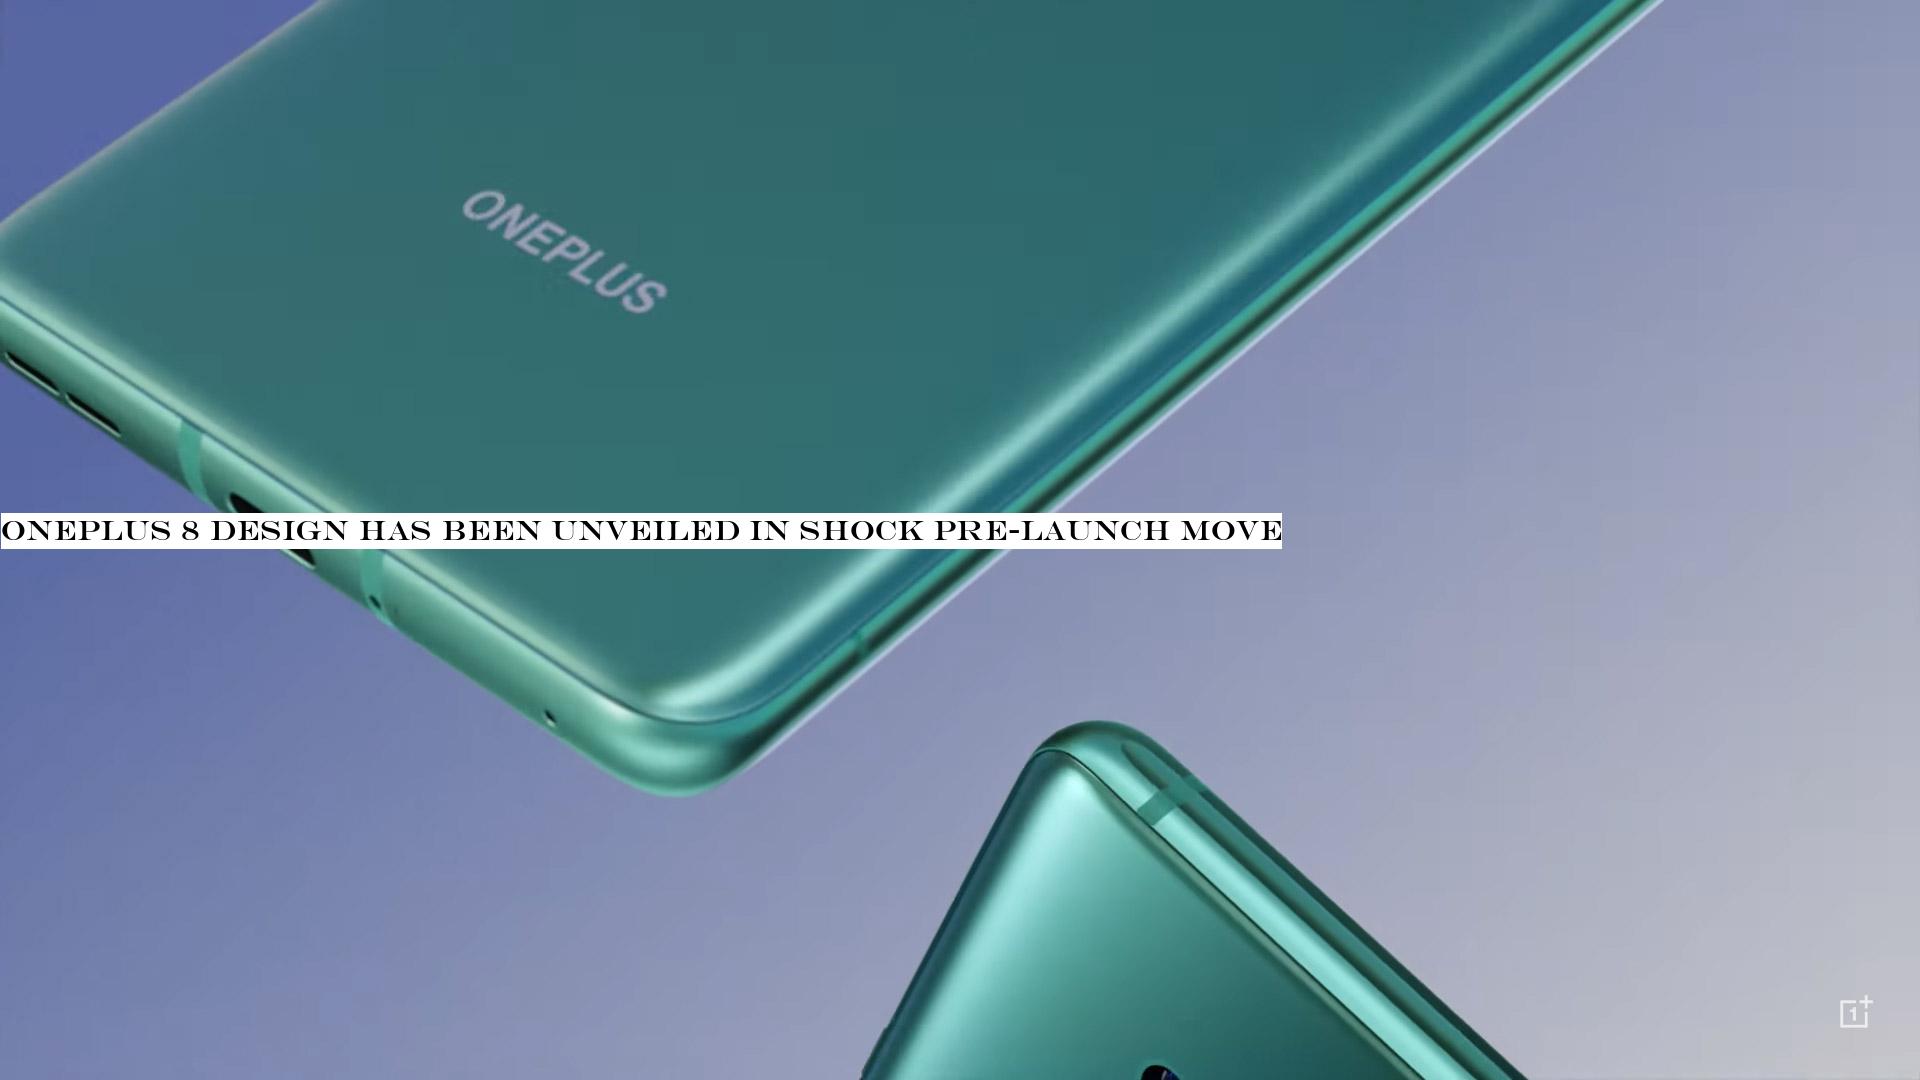 OnePlus 8 design has been unveiled in shock pre-launch move